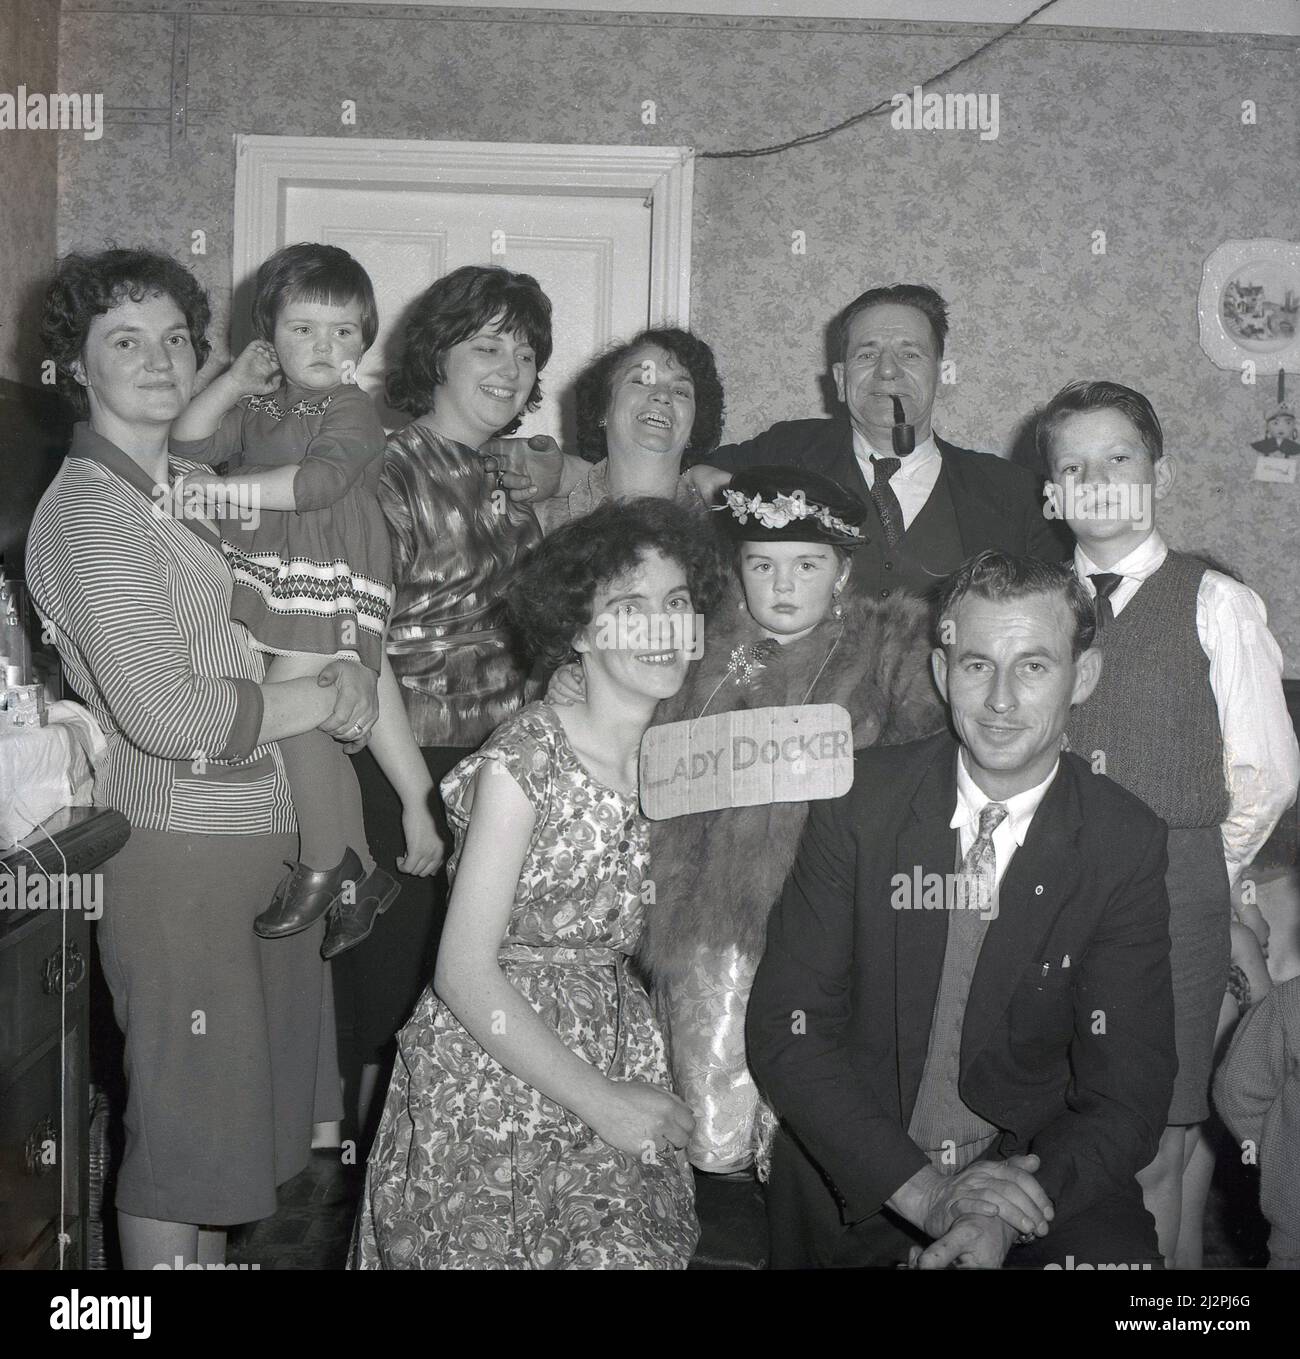 1961, historical, with her mum and dad and other family members celebrating her birthday, a young girl dressed up, as the cardboard sign on her says, as 'Lady Docker', Stockport, Manchester, England, UK. In post-war British, Lady Docker - born Norah Royce Turner in a flat over a butchers shop in Derby - was a media 'personality', a socialite. Through marriage, in particular her third marriage to Sir Bernard Docker, Chairman of the Daimler car company and a director of Midland Bank, she led a colouful, extravagant life for the time, but she never forgot her humble working class roots. Stock Photo